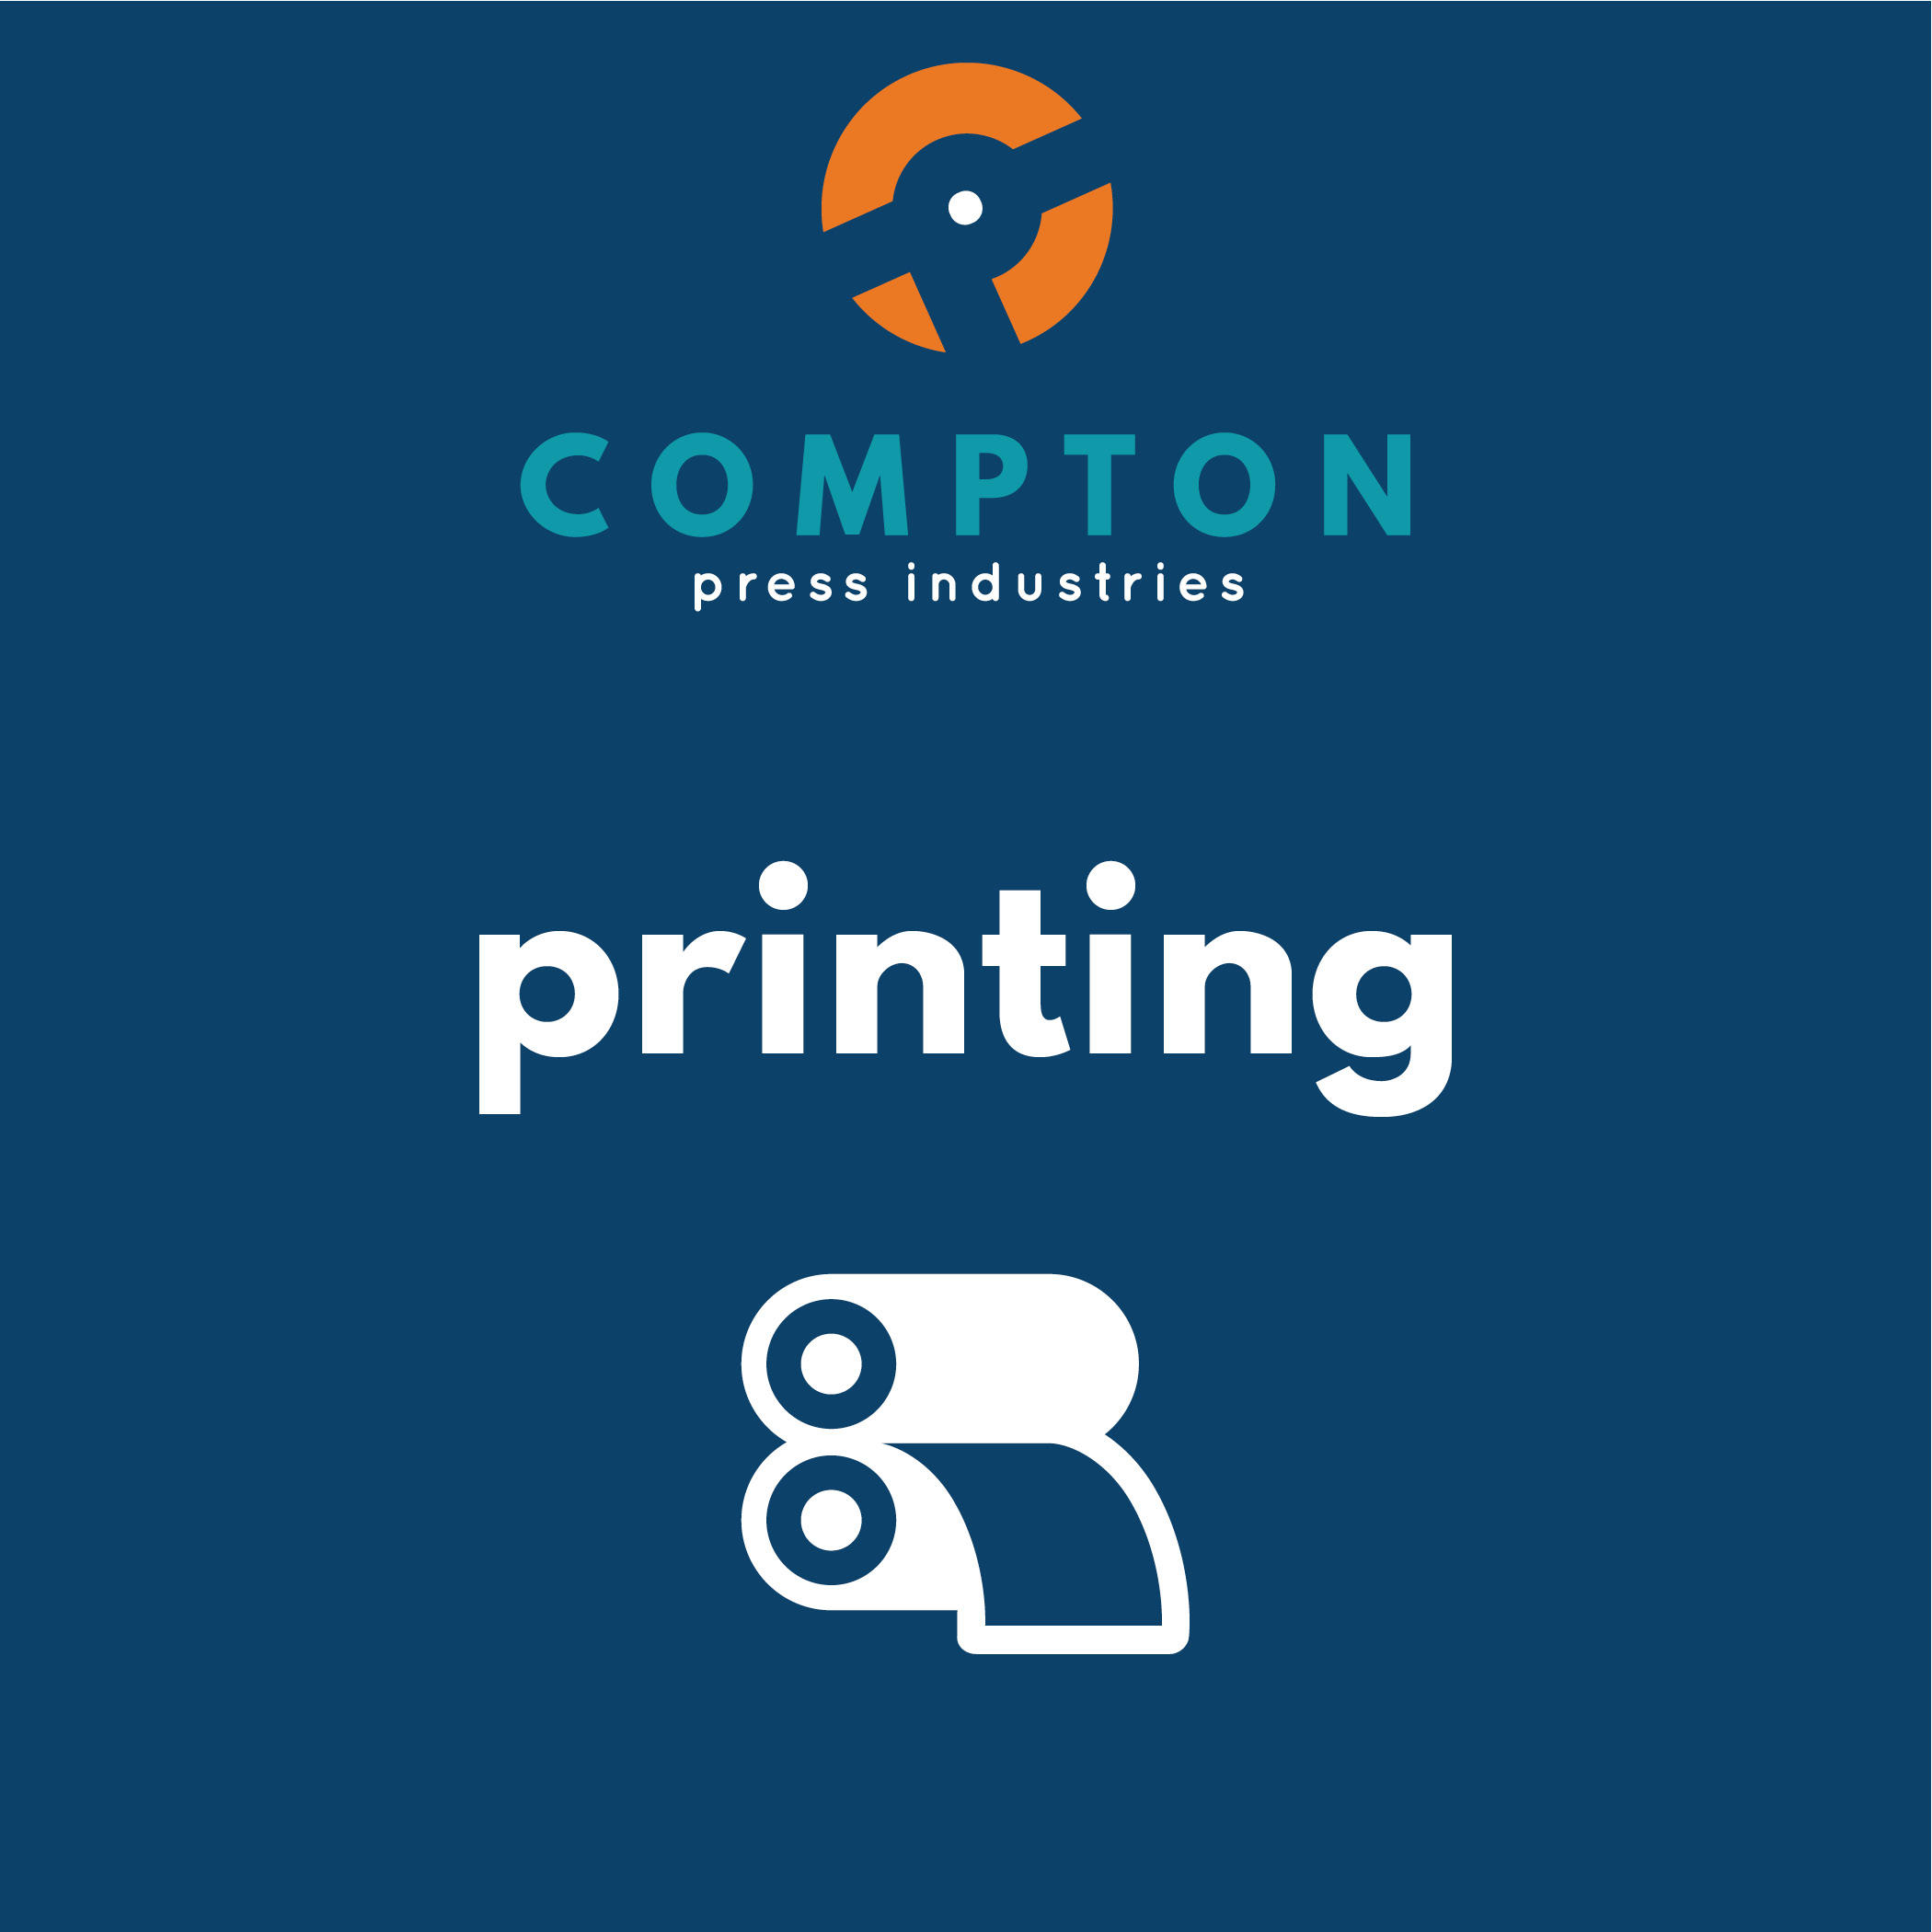 For more information about Compton Press, visit www.comptonpress.com or call 248-473-8210.